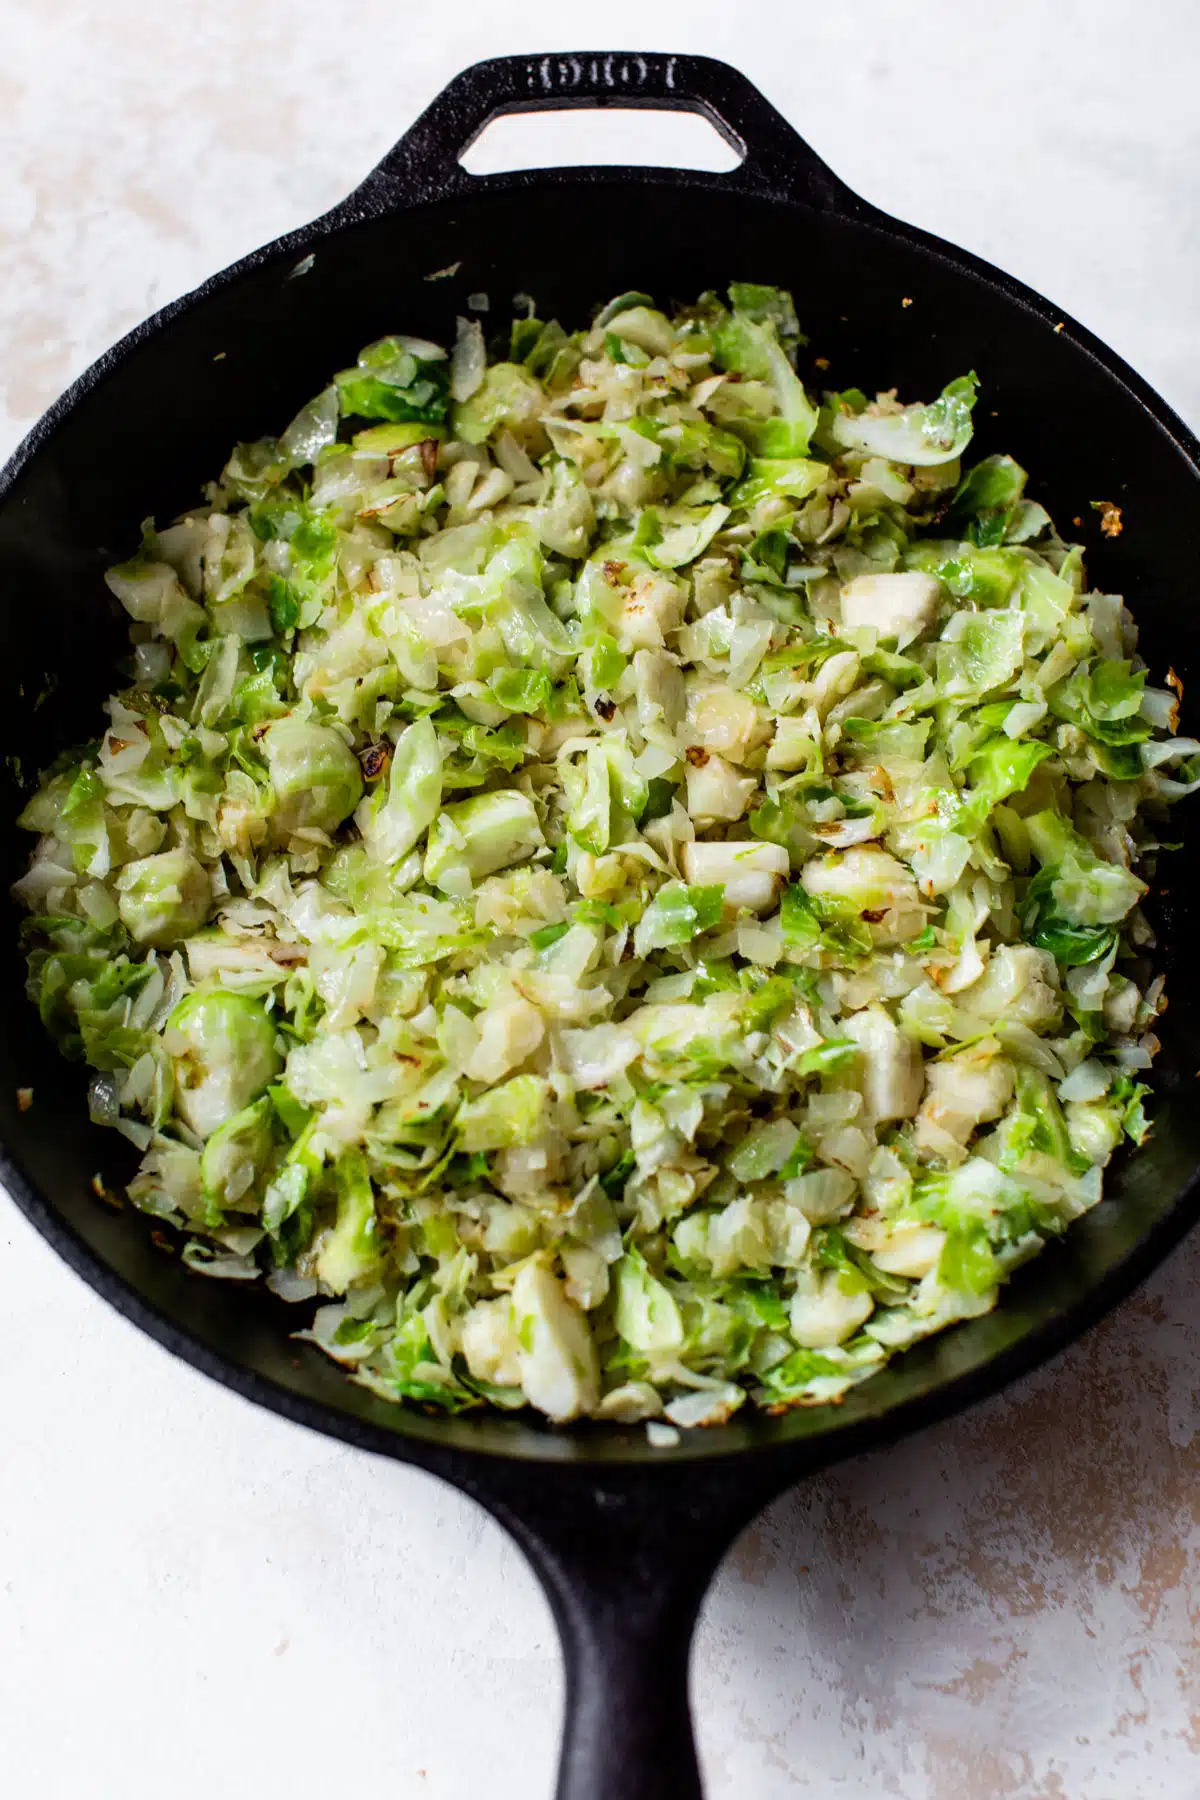 chopped brussels sprouts cooking in a cast iron skillet